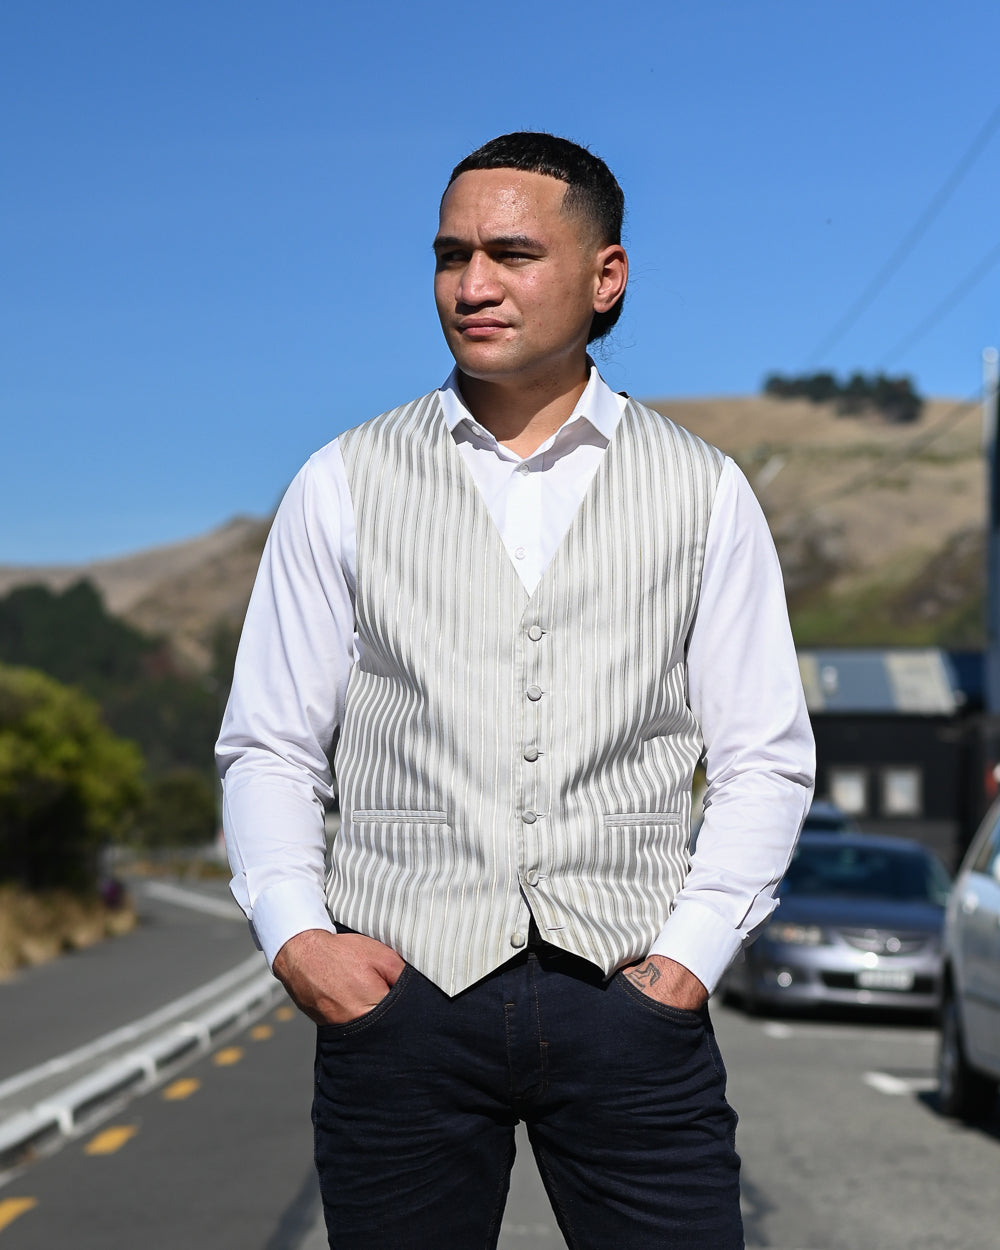 Handsome young man standing in the roadway wearing striped grey waistcoat and a white shirt